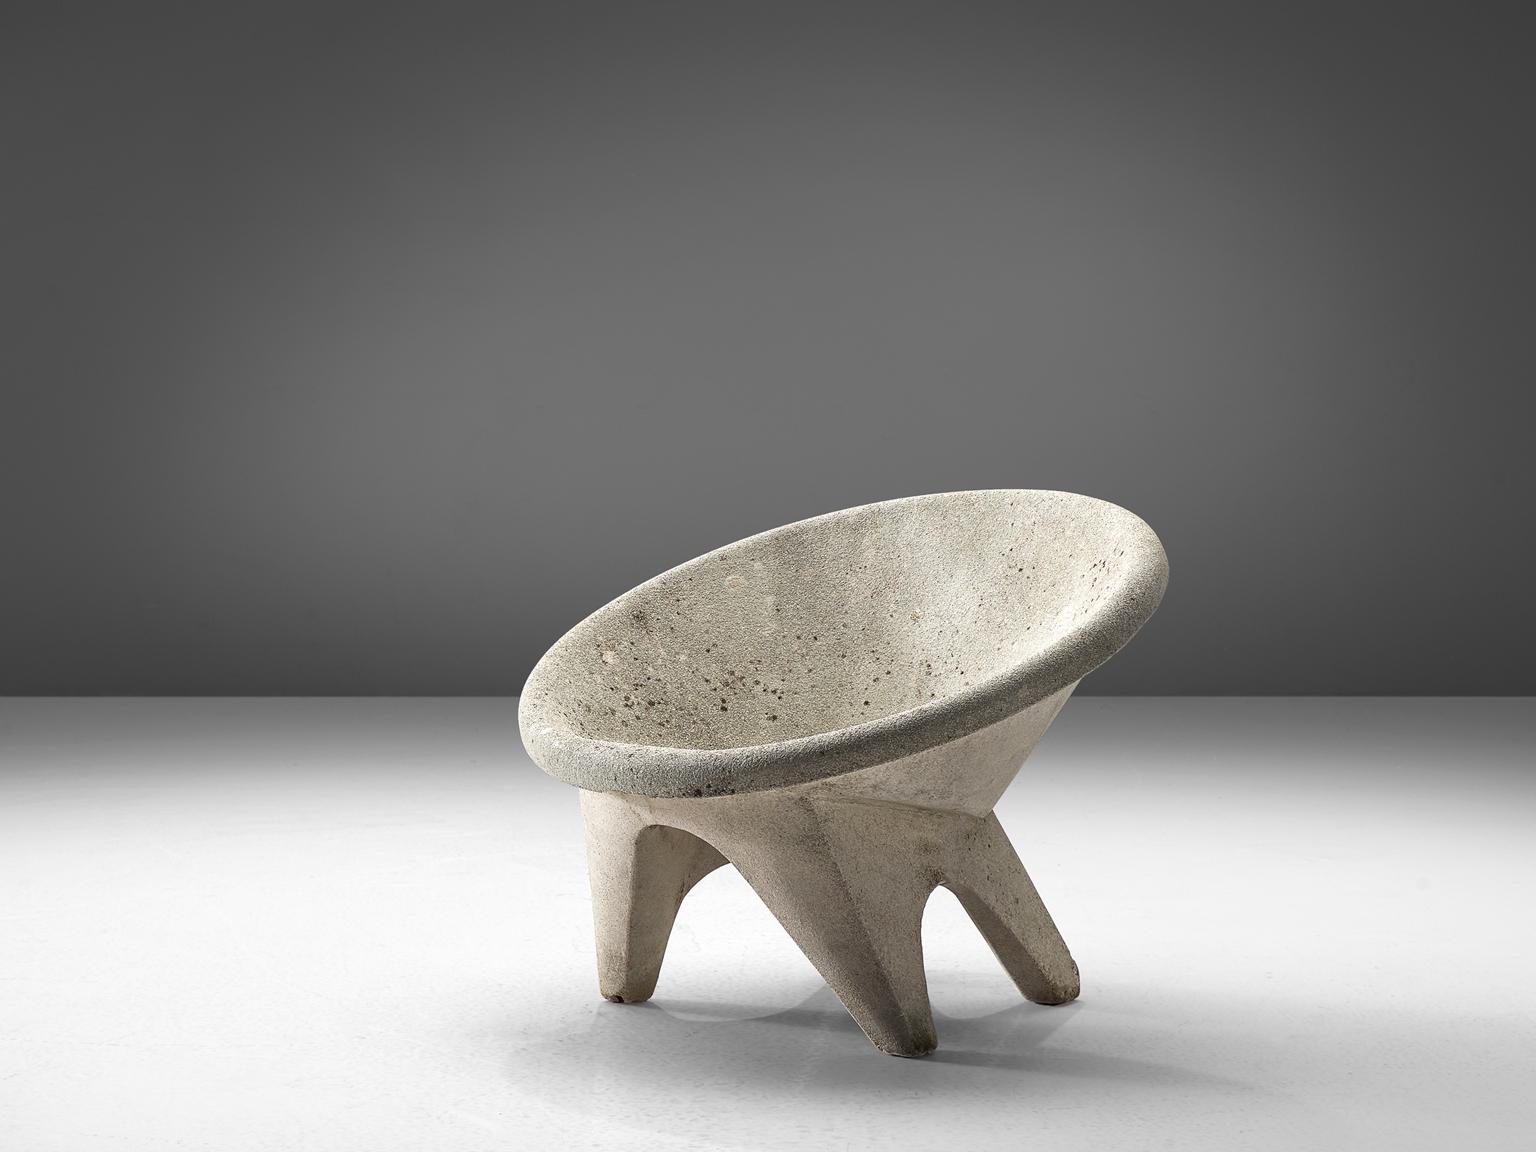 Outdoor chair, concrete, Europe, 1970s.

This characteristic lounge chair is completely made of concrete. This makes it ideal for outdoor use, for in a garden of patio. The chairs feature a tilted round shell that functions as the seat. The bulky